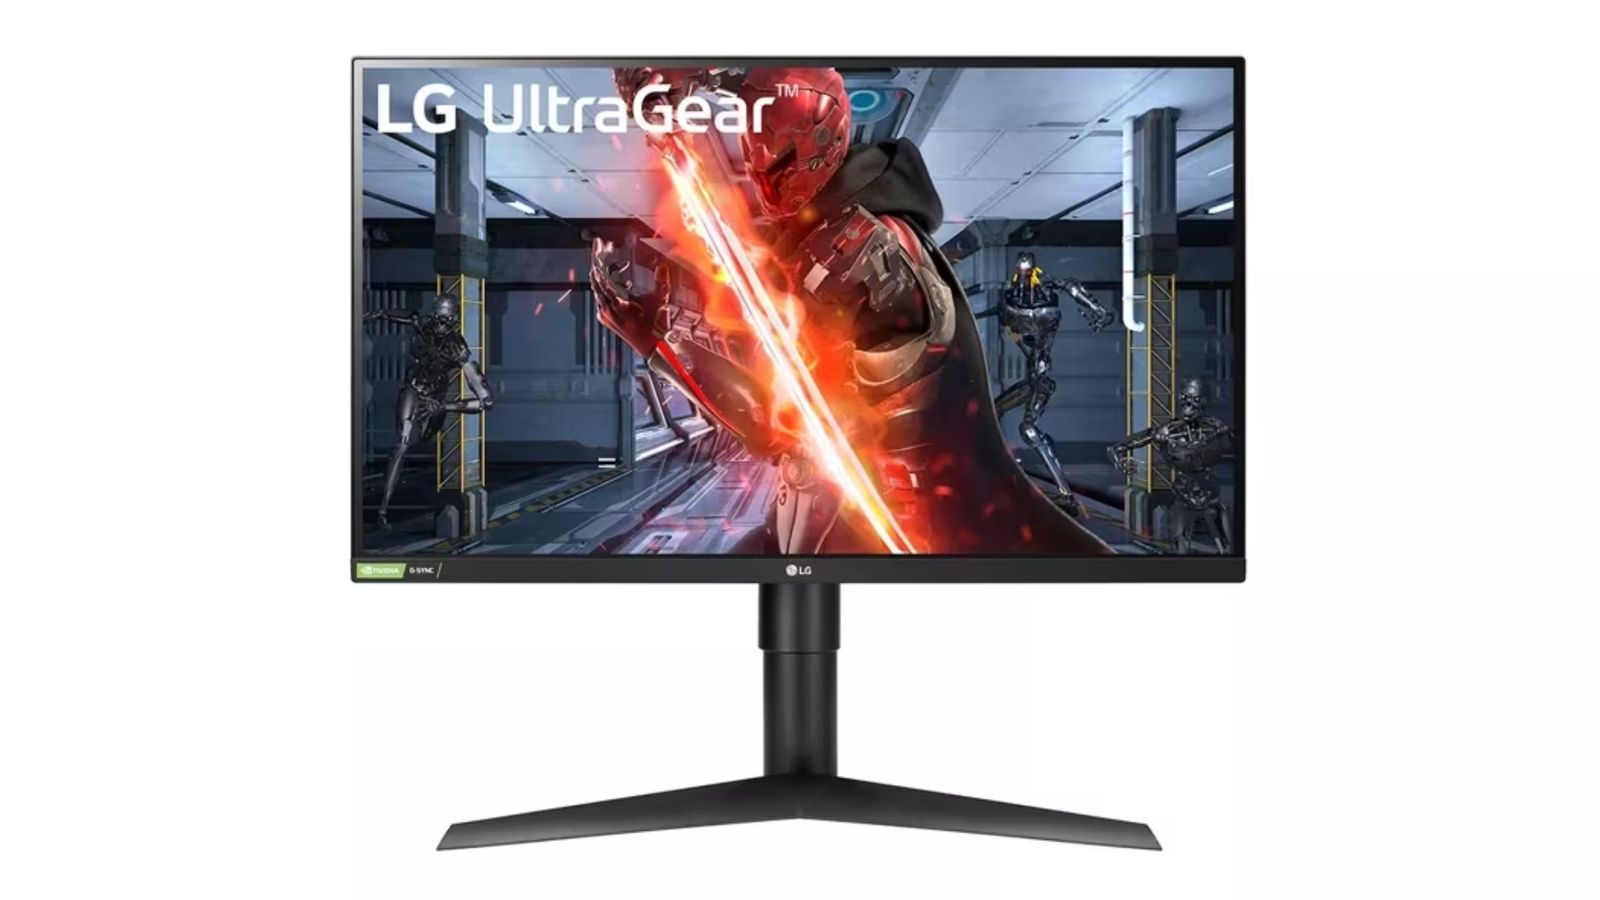 LG Ultragear 27GL83A-B product image of a character in a red mask holding a flaming sword on the display.